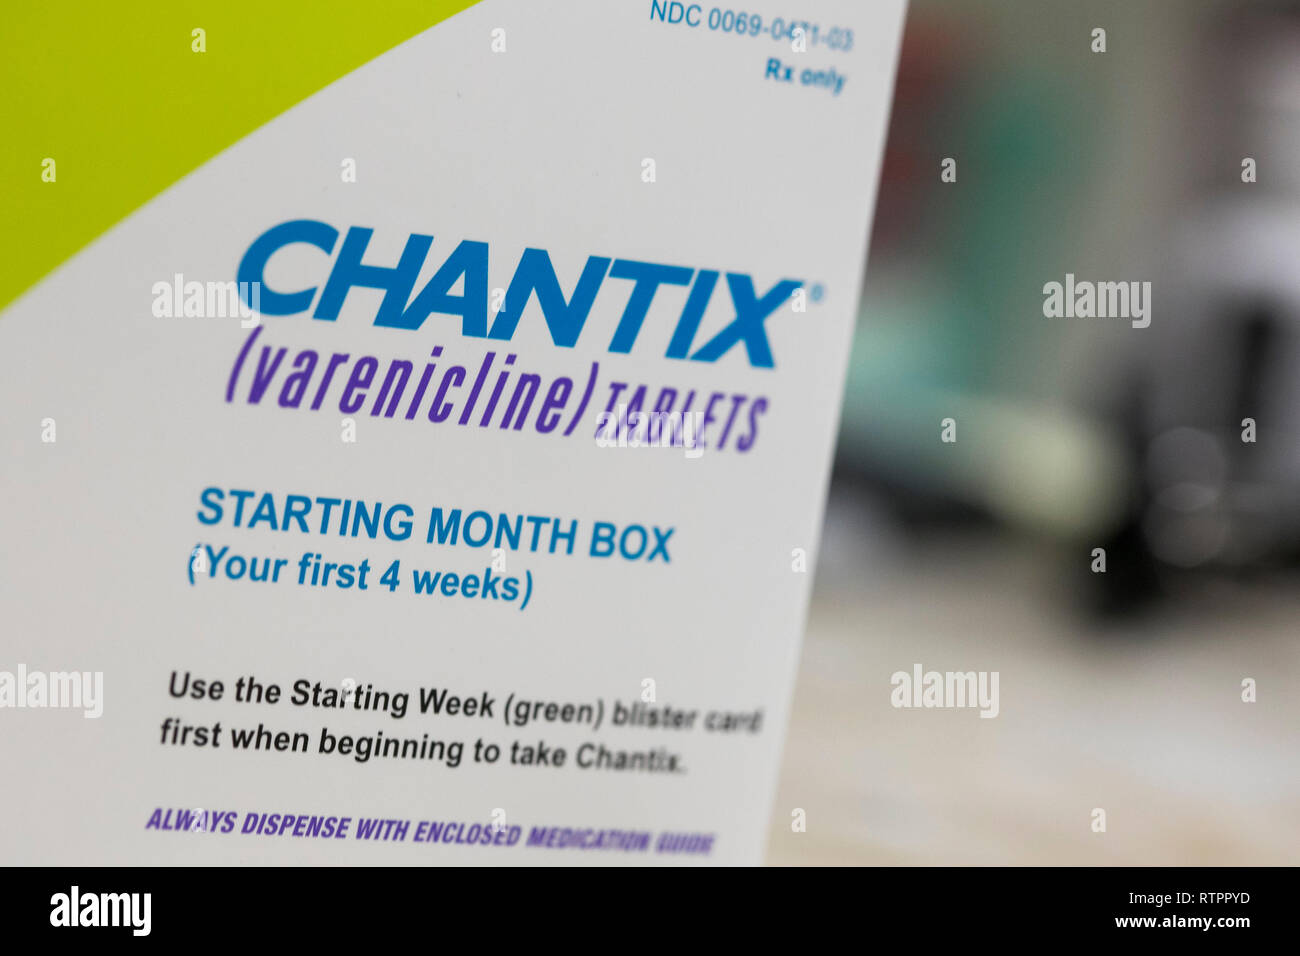 A box of Chantix (varenicline) prescription pharmaceuticals photographed in a pharmacy. Stock Photo